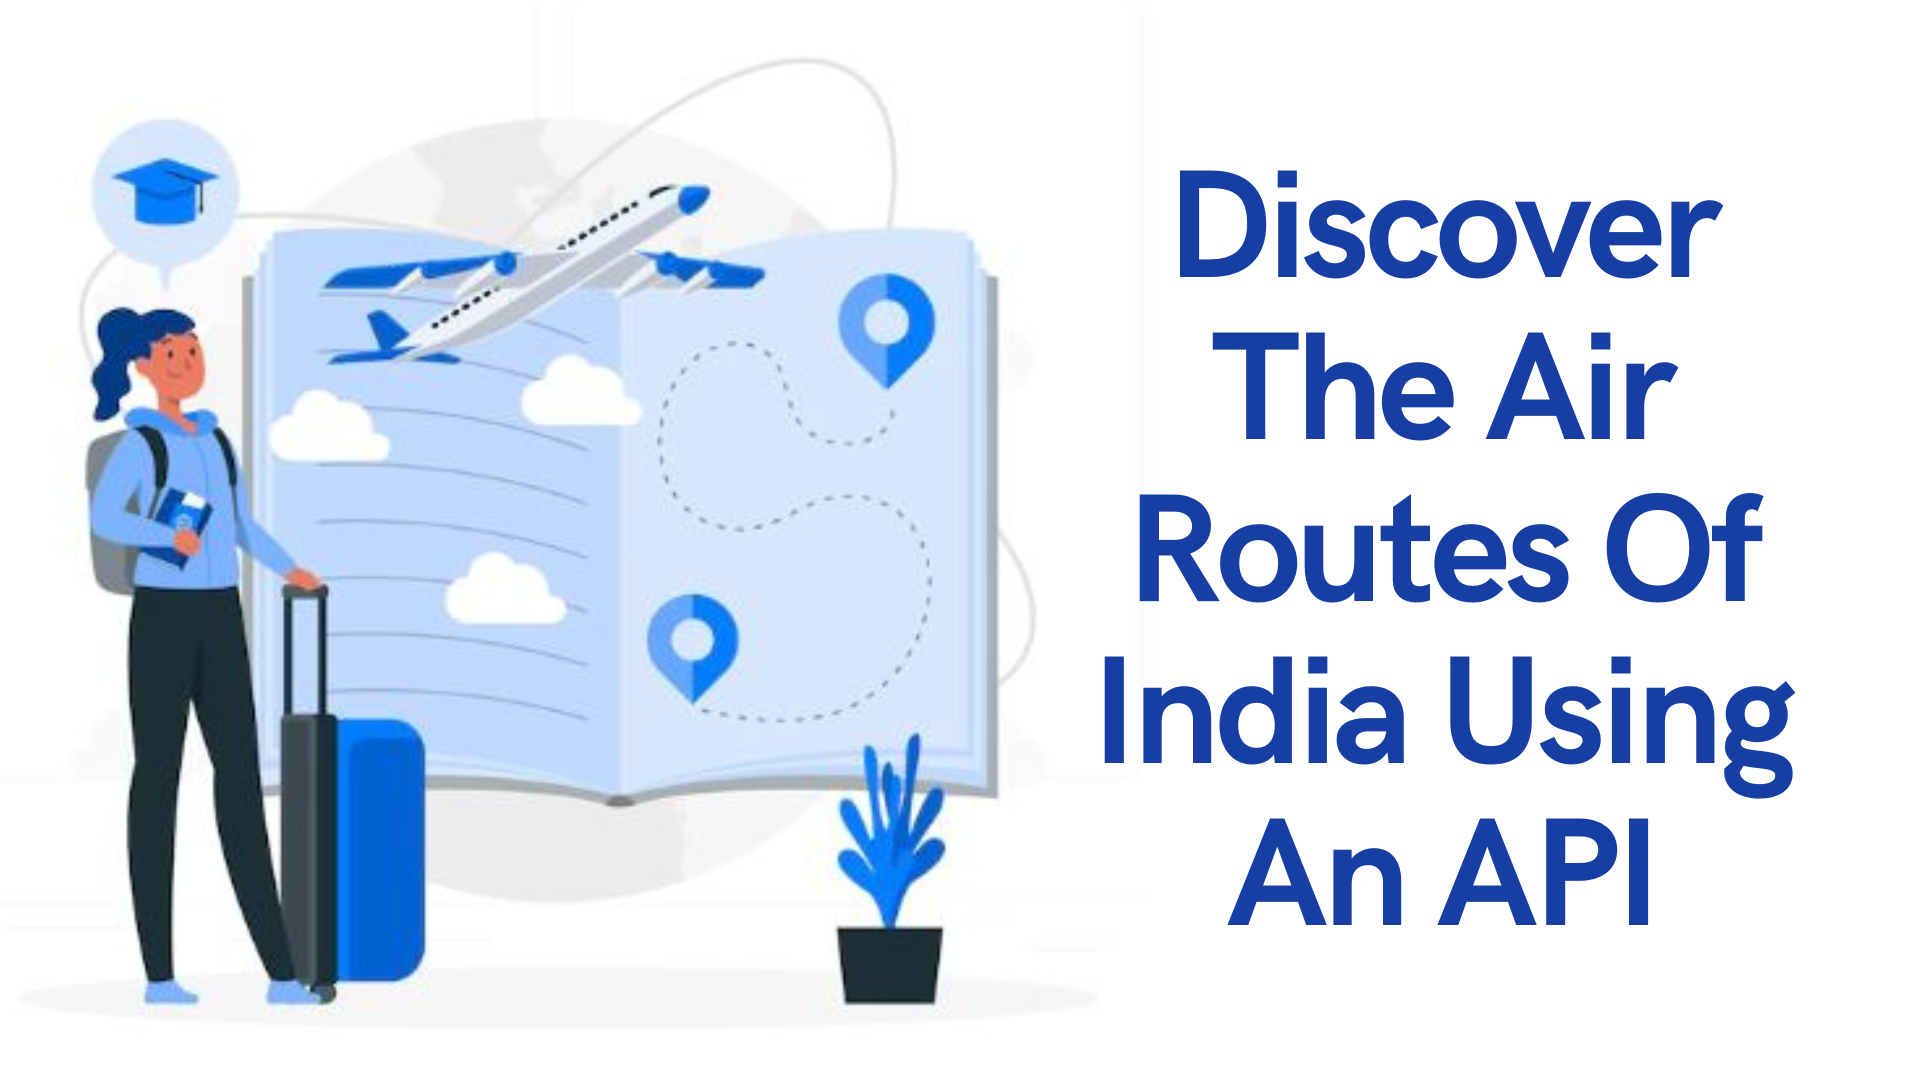 Discover The Air Routes Of India Using An API